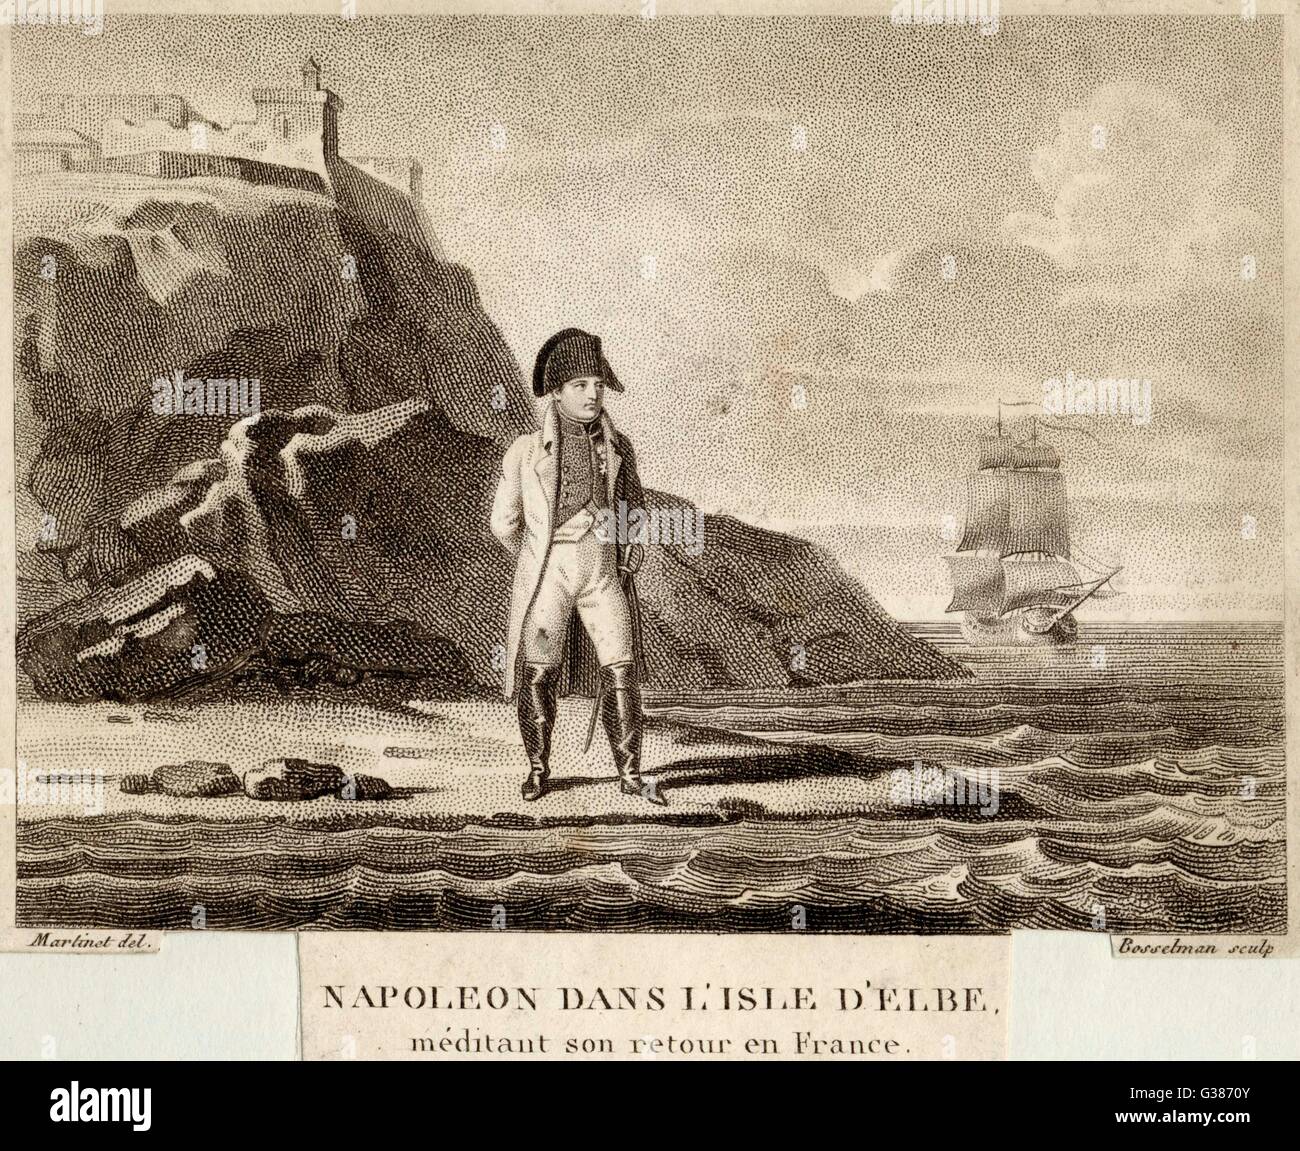 Exiled to the island of Elba,  after his abdication, he none  the less plans a glorious  come-back...       Date: 1814-1815 Stock Photo